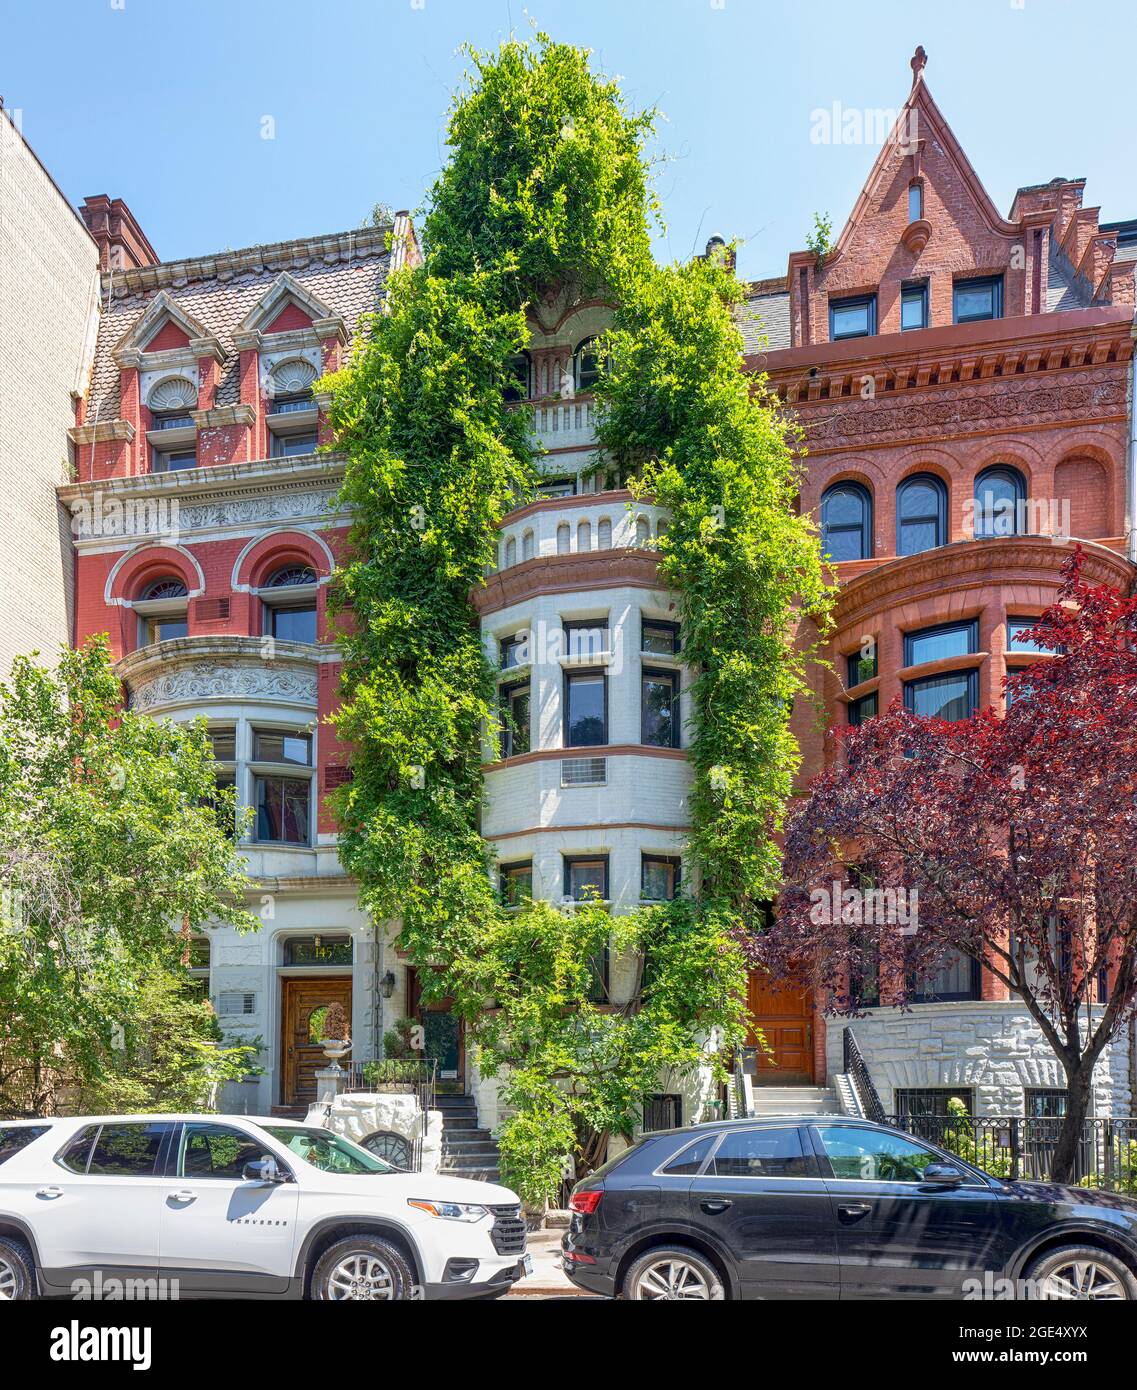 141 and 143 West 81st Street (r), Rossiter & Wright, architects. Mixed Romanesque Revival and Queen Anne styles; 145 (l), William Baker, architect. Stock Photo